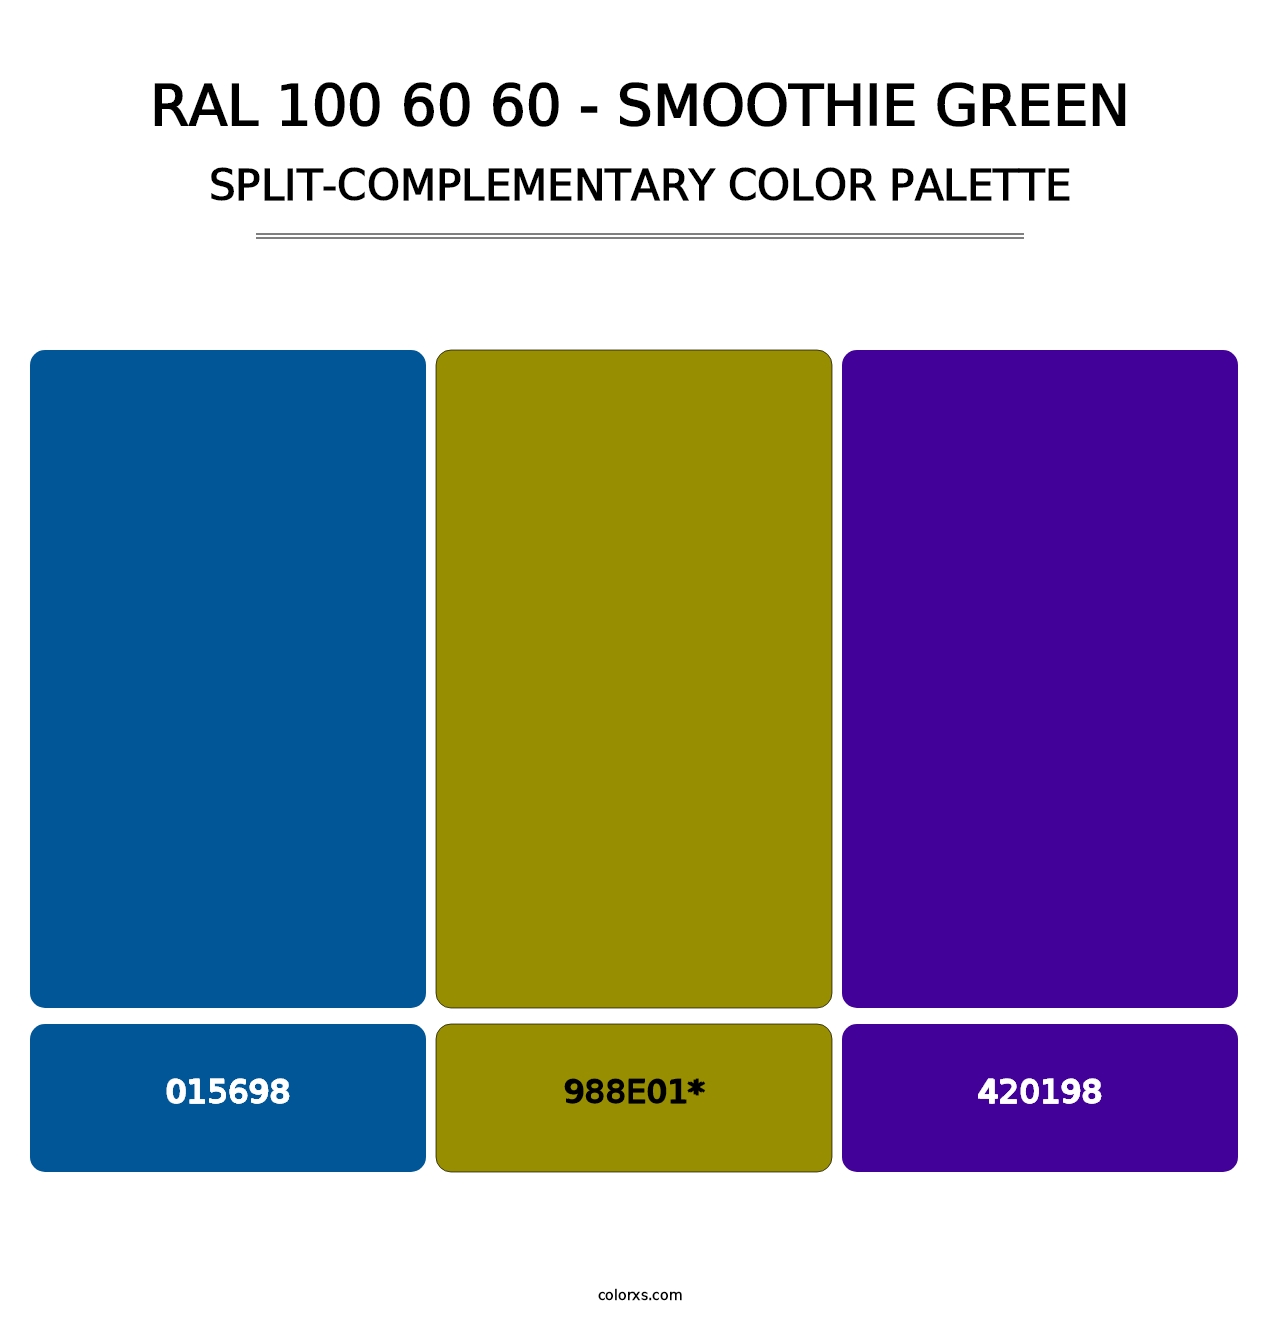 RAL 100 60 60 - Smoothie Green - Split-Complementary Color Palette